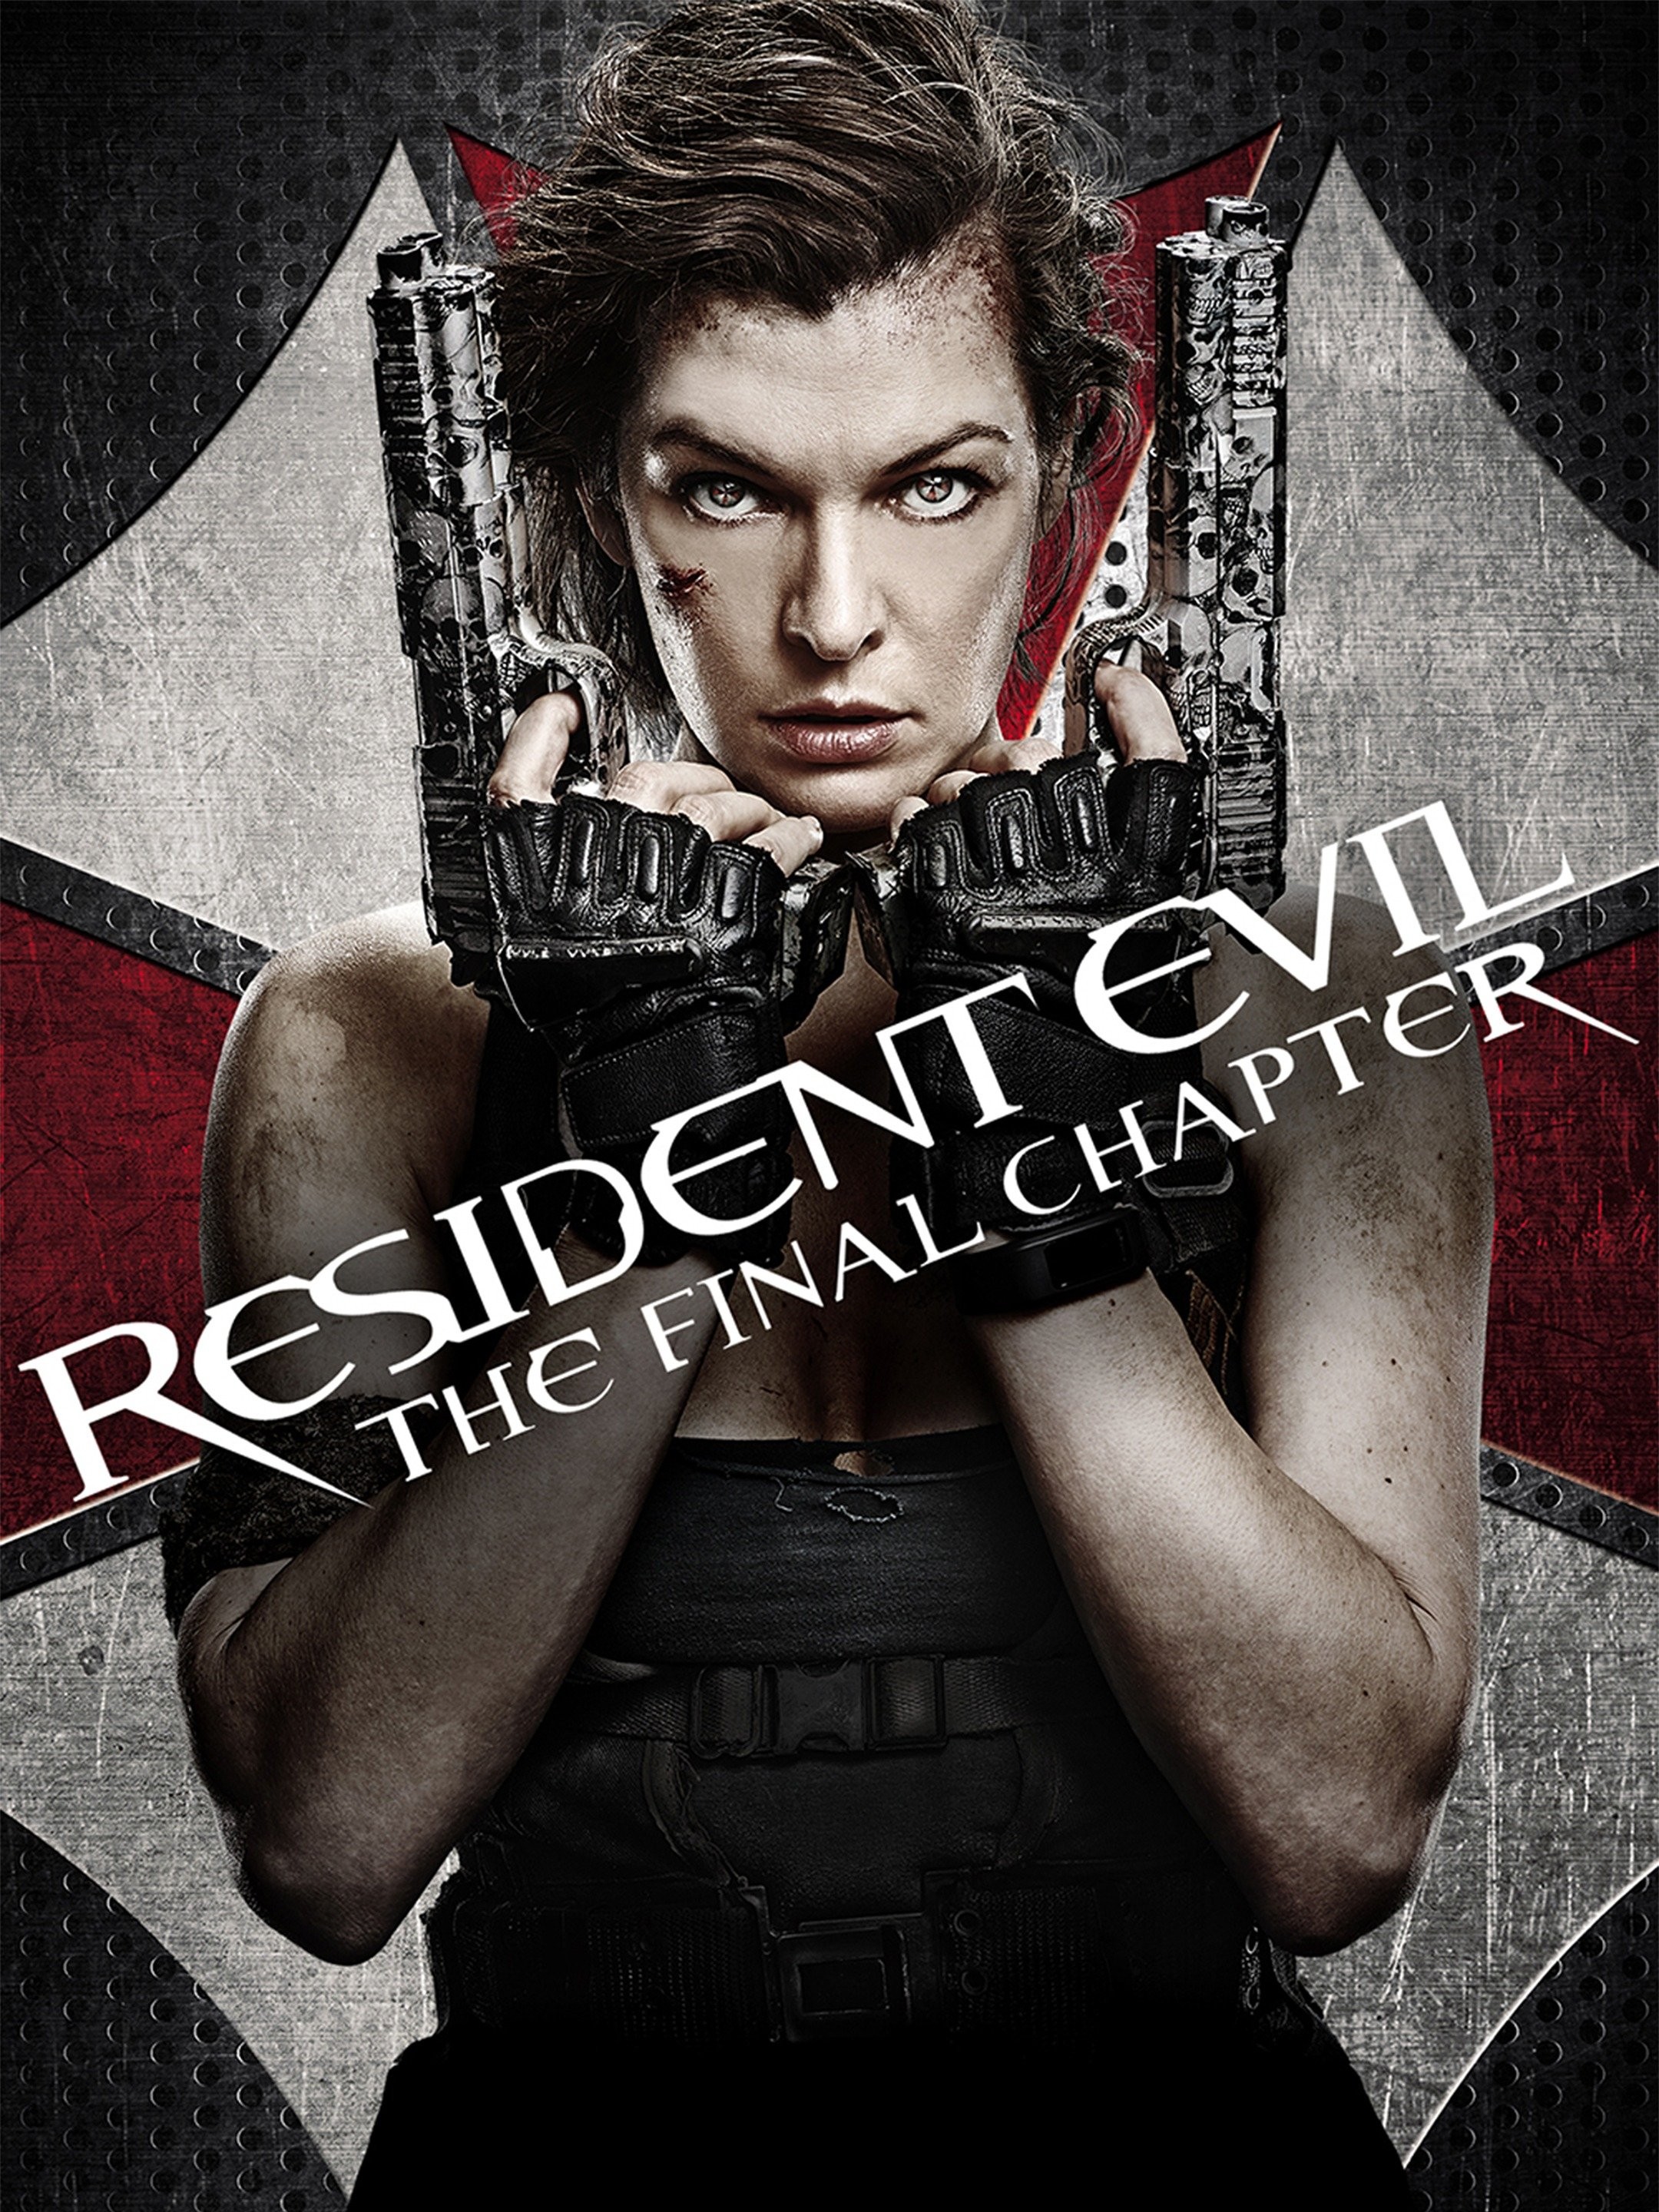 Meet the last survivors in 'Resident Evil: The Final Chapter' – CinemaBravo